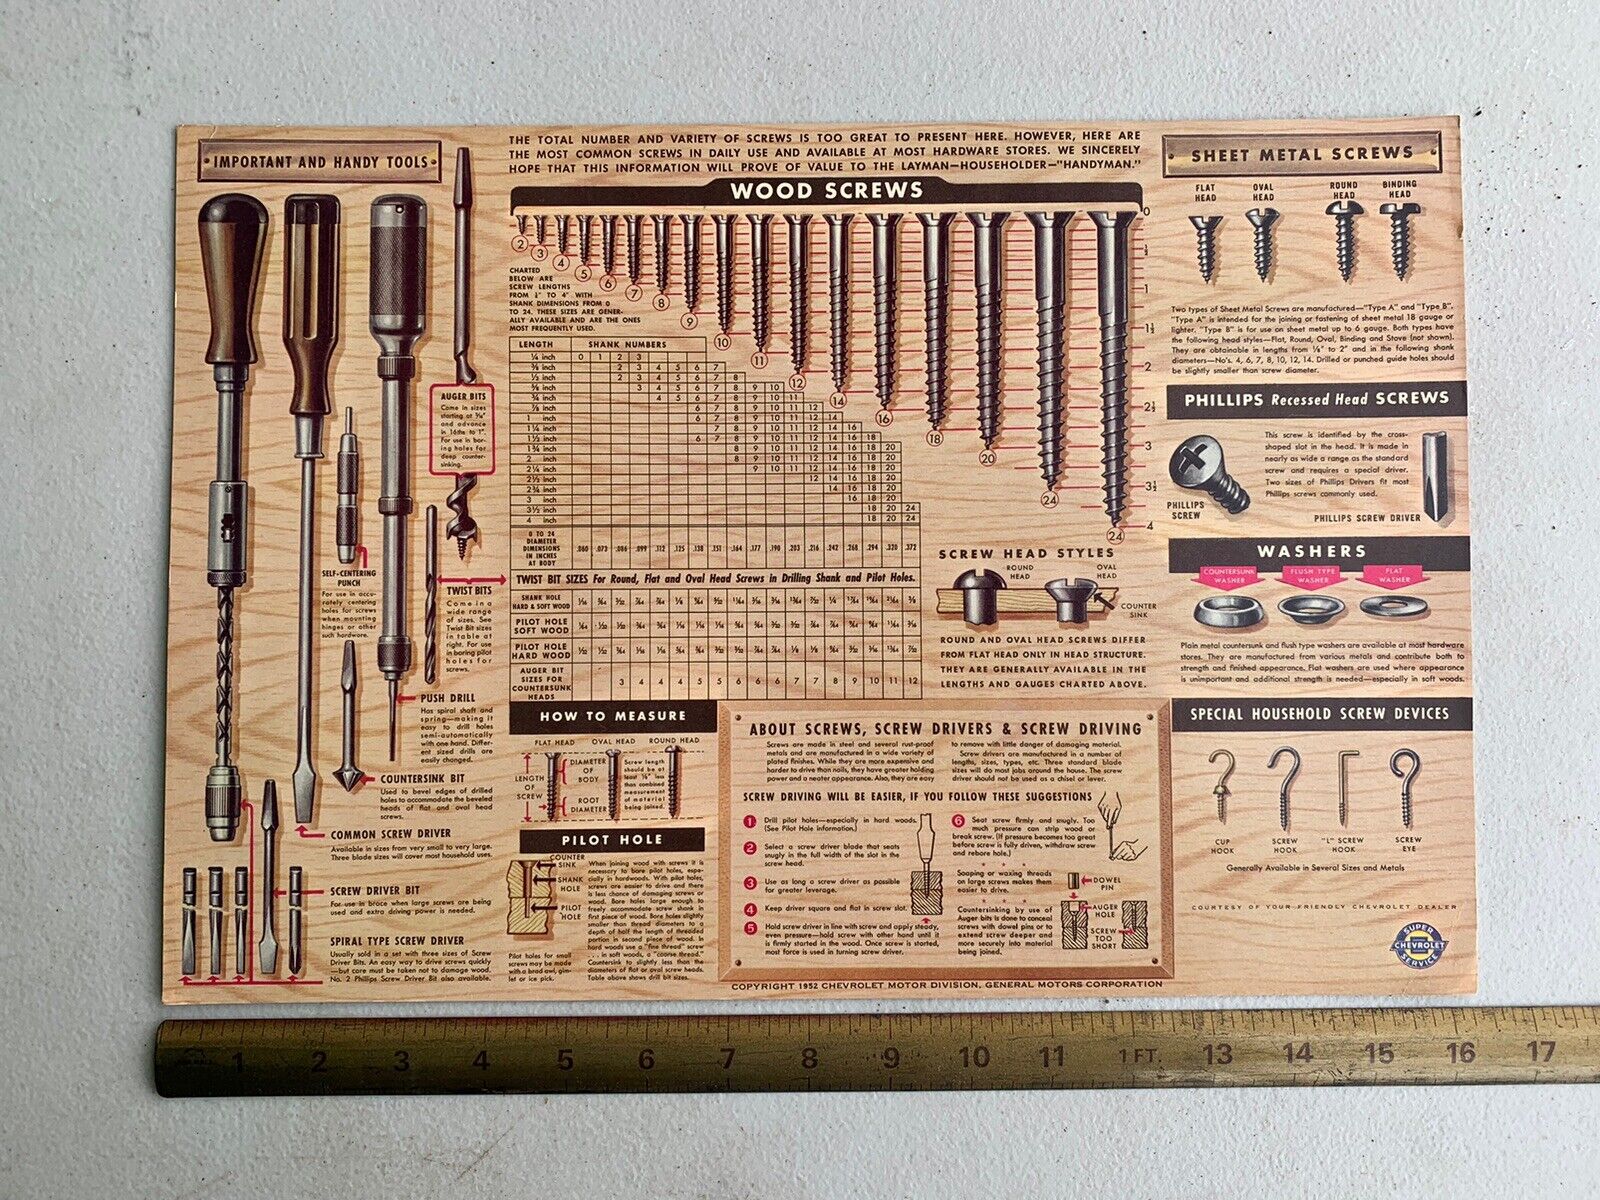 1952 Super Chevrolet Service Hand Tools Poster ~ Important and Handy Tools